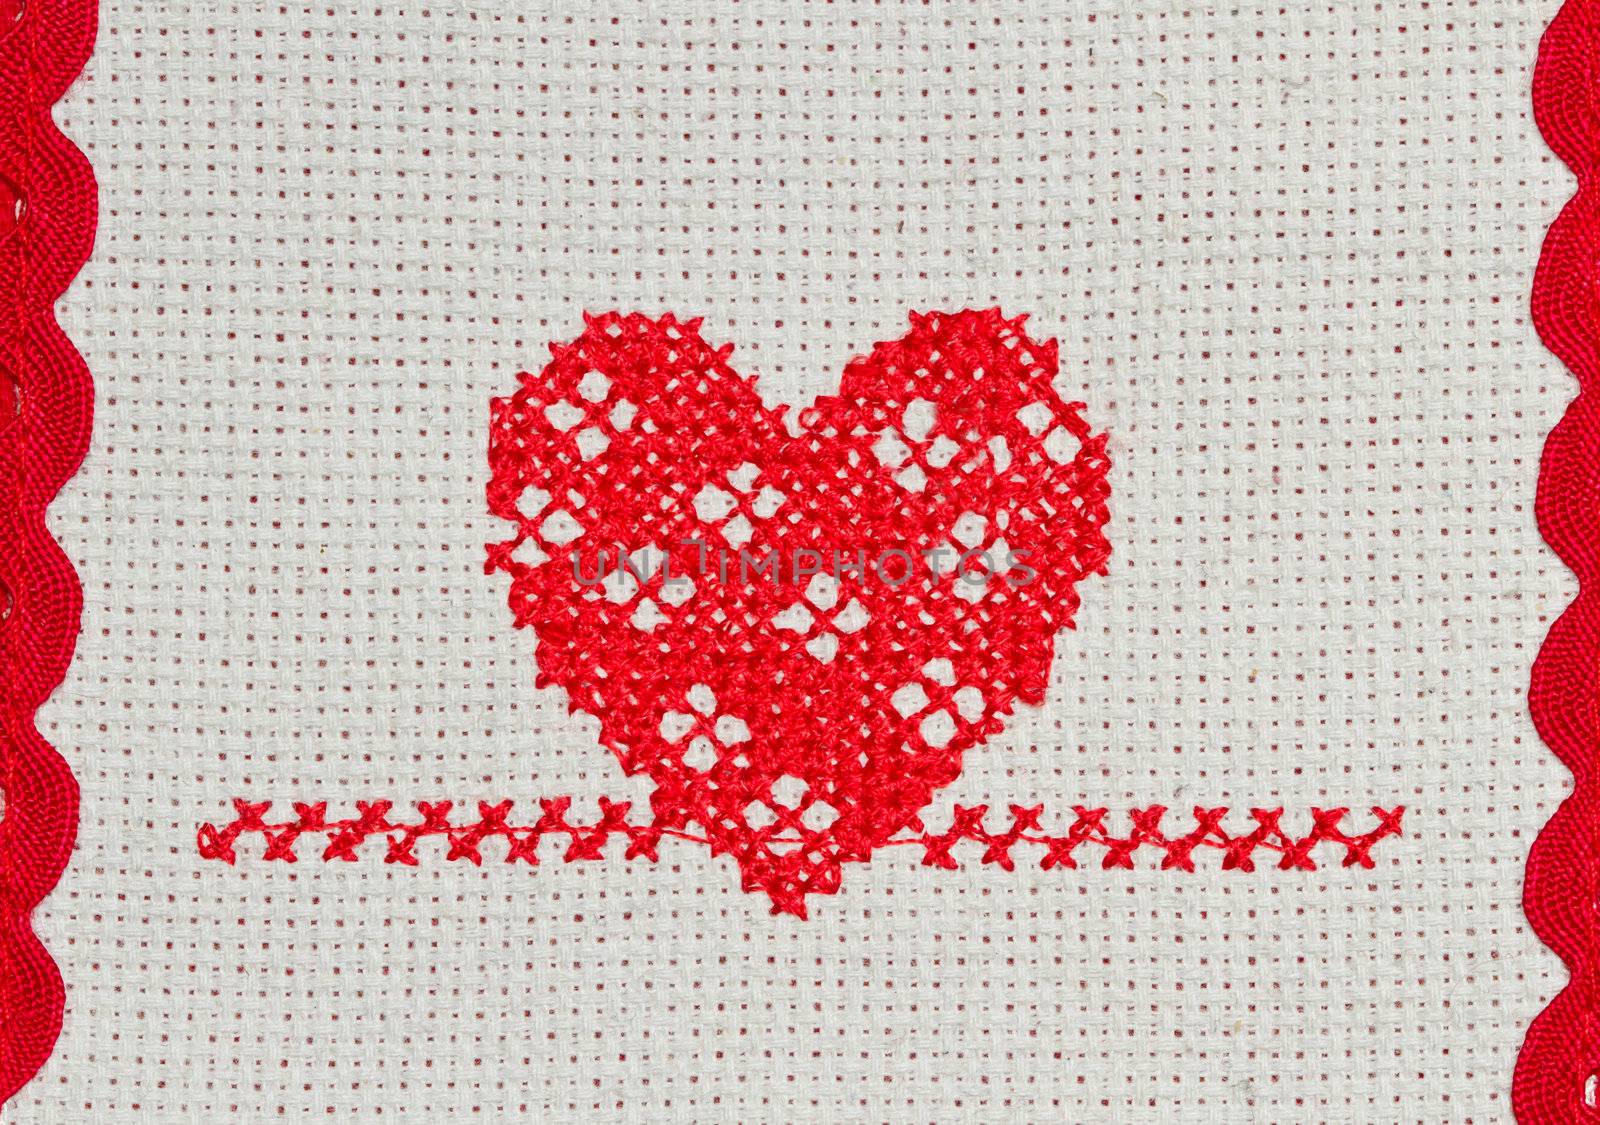 red heart embroidered in cross stitch on canvas  by lsantilli